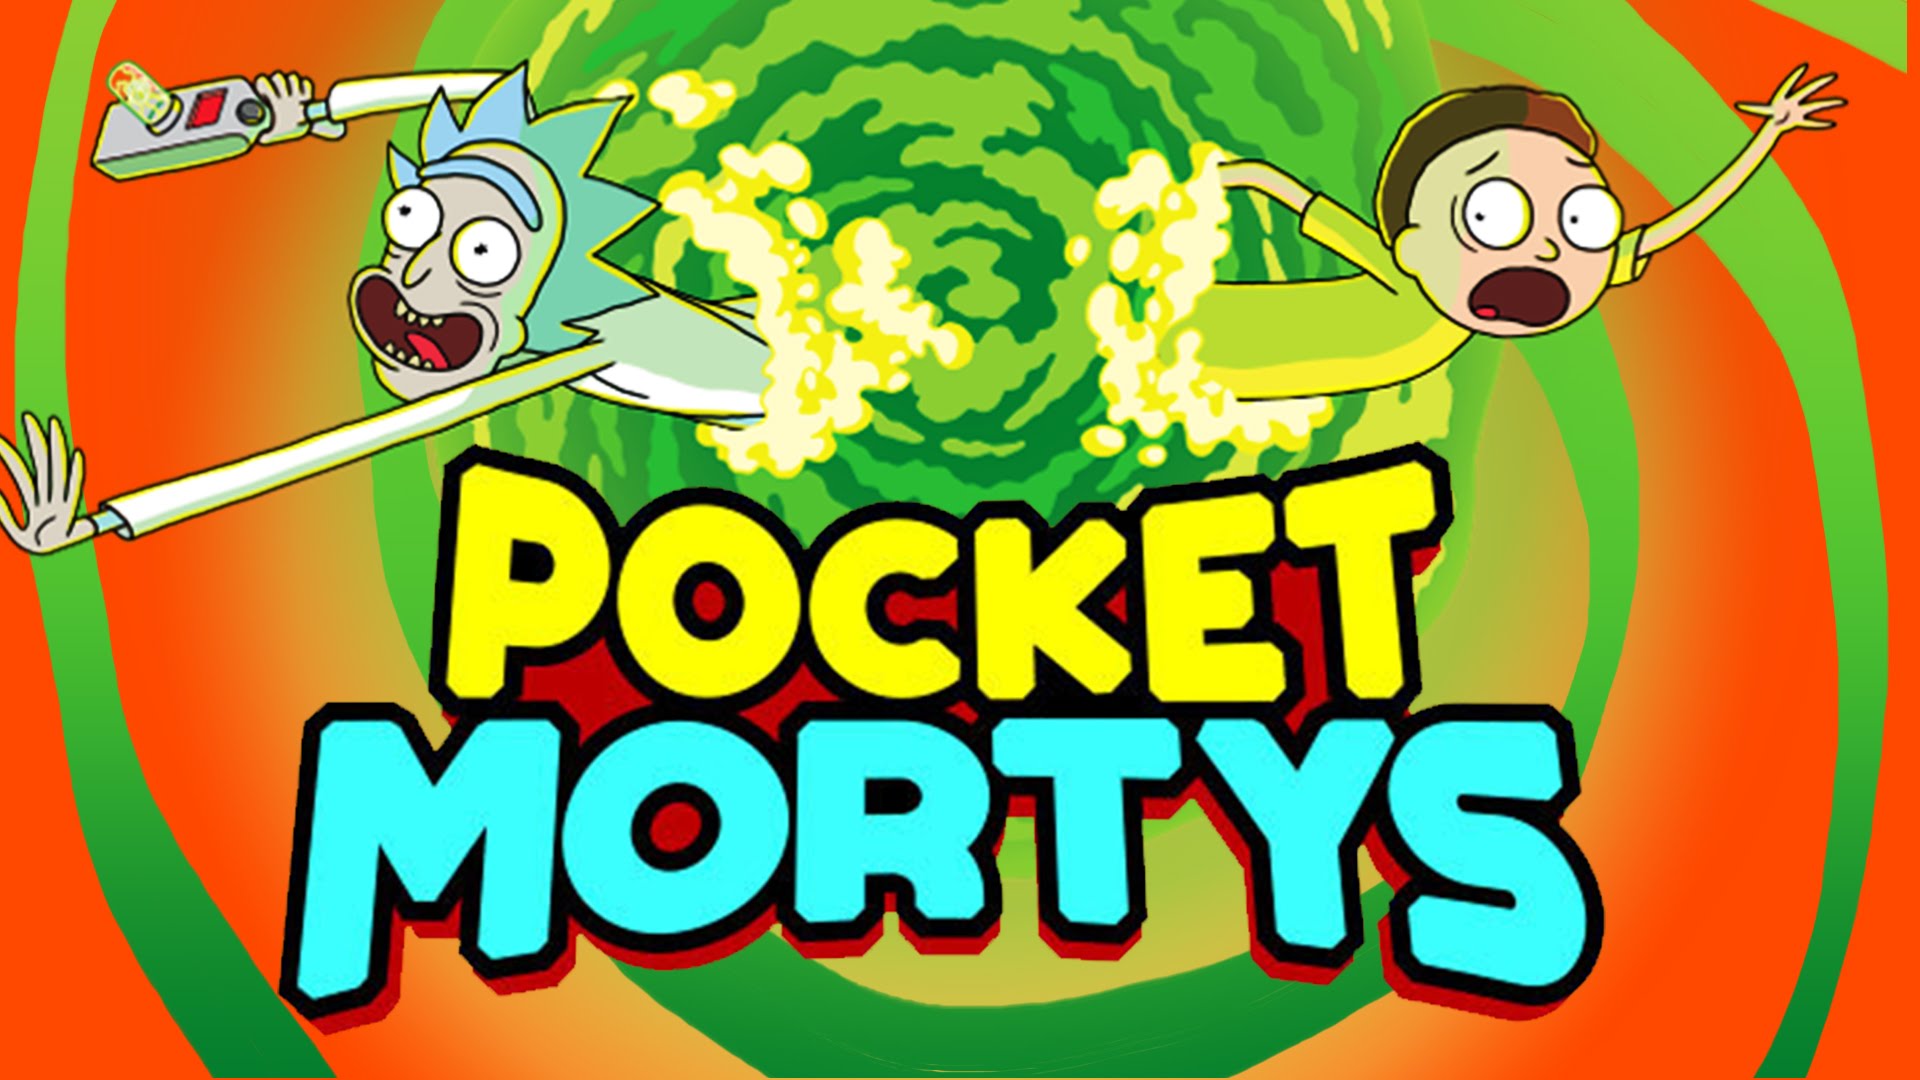 Video Game Rick and Morty: Pocket Mortys HD Wallpaper